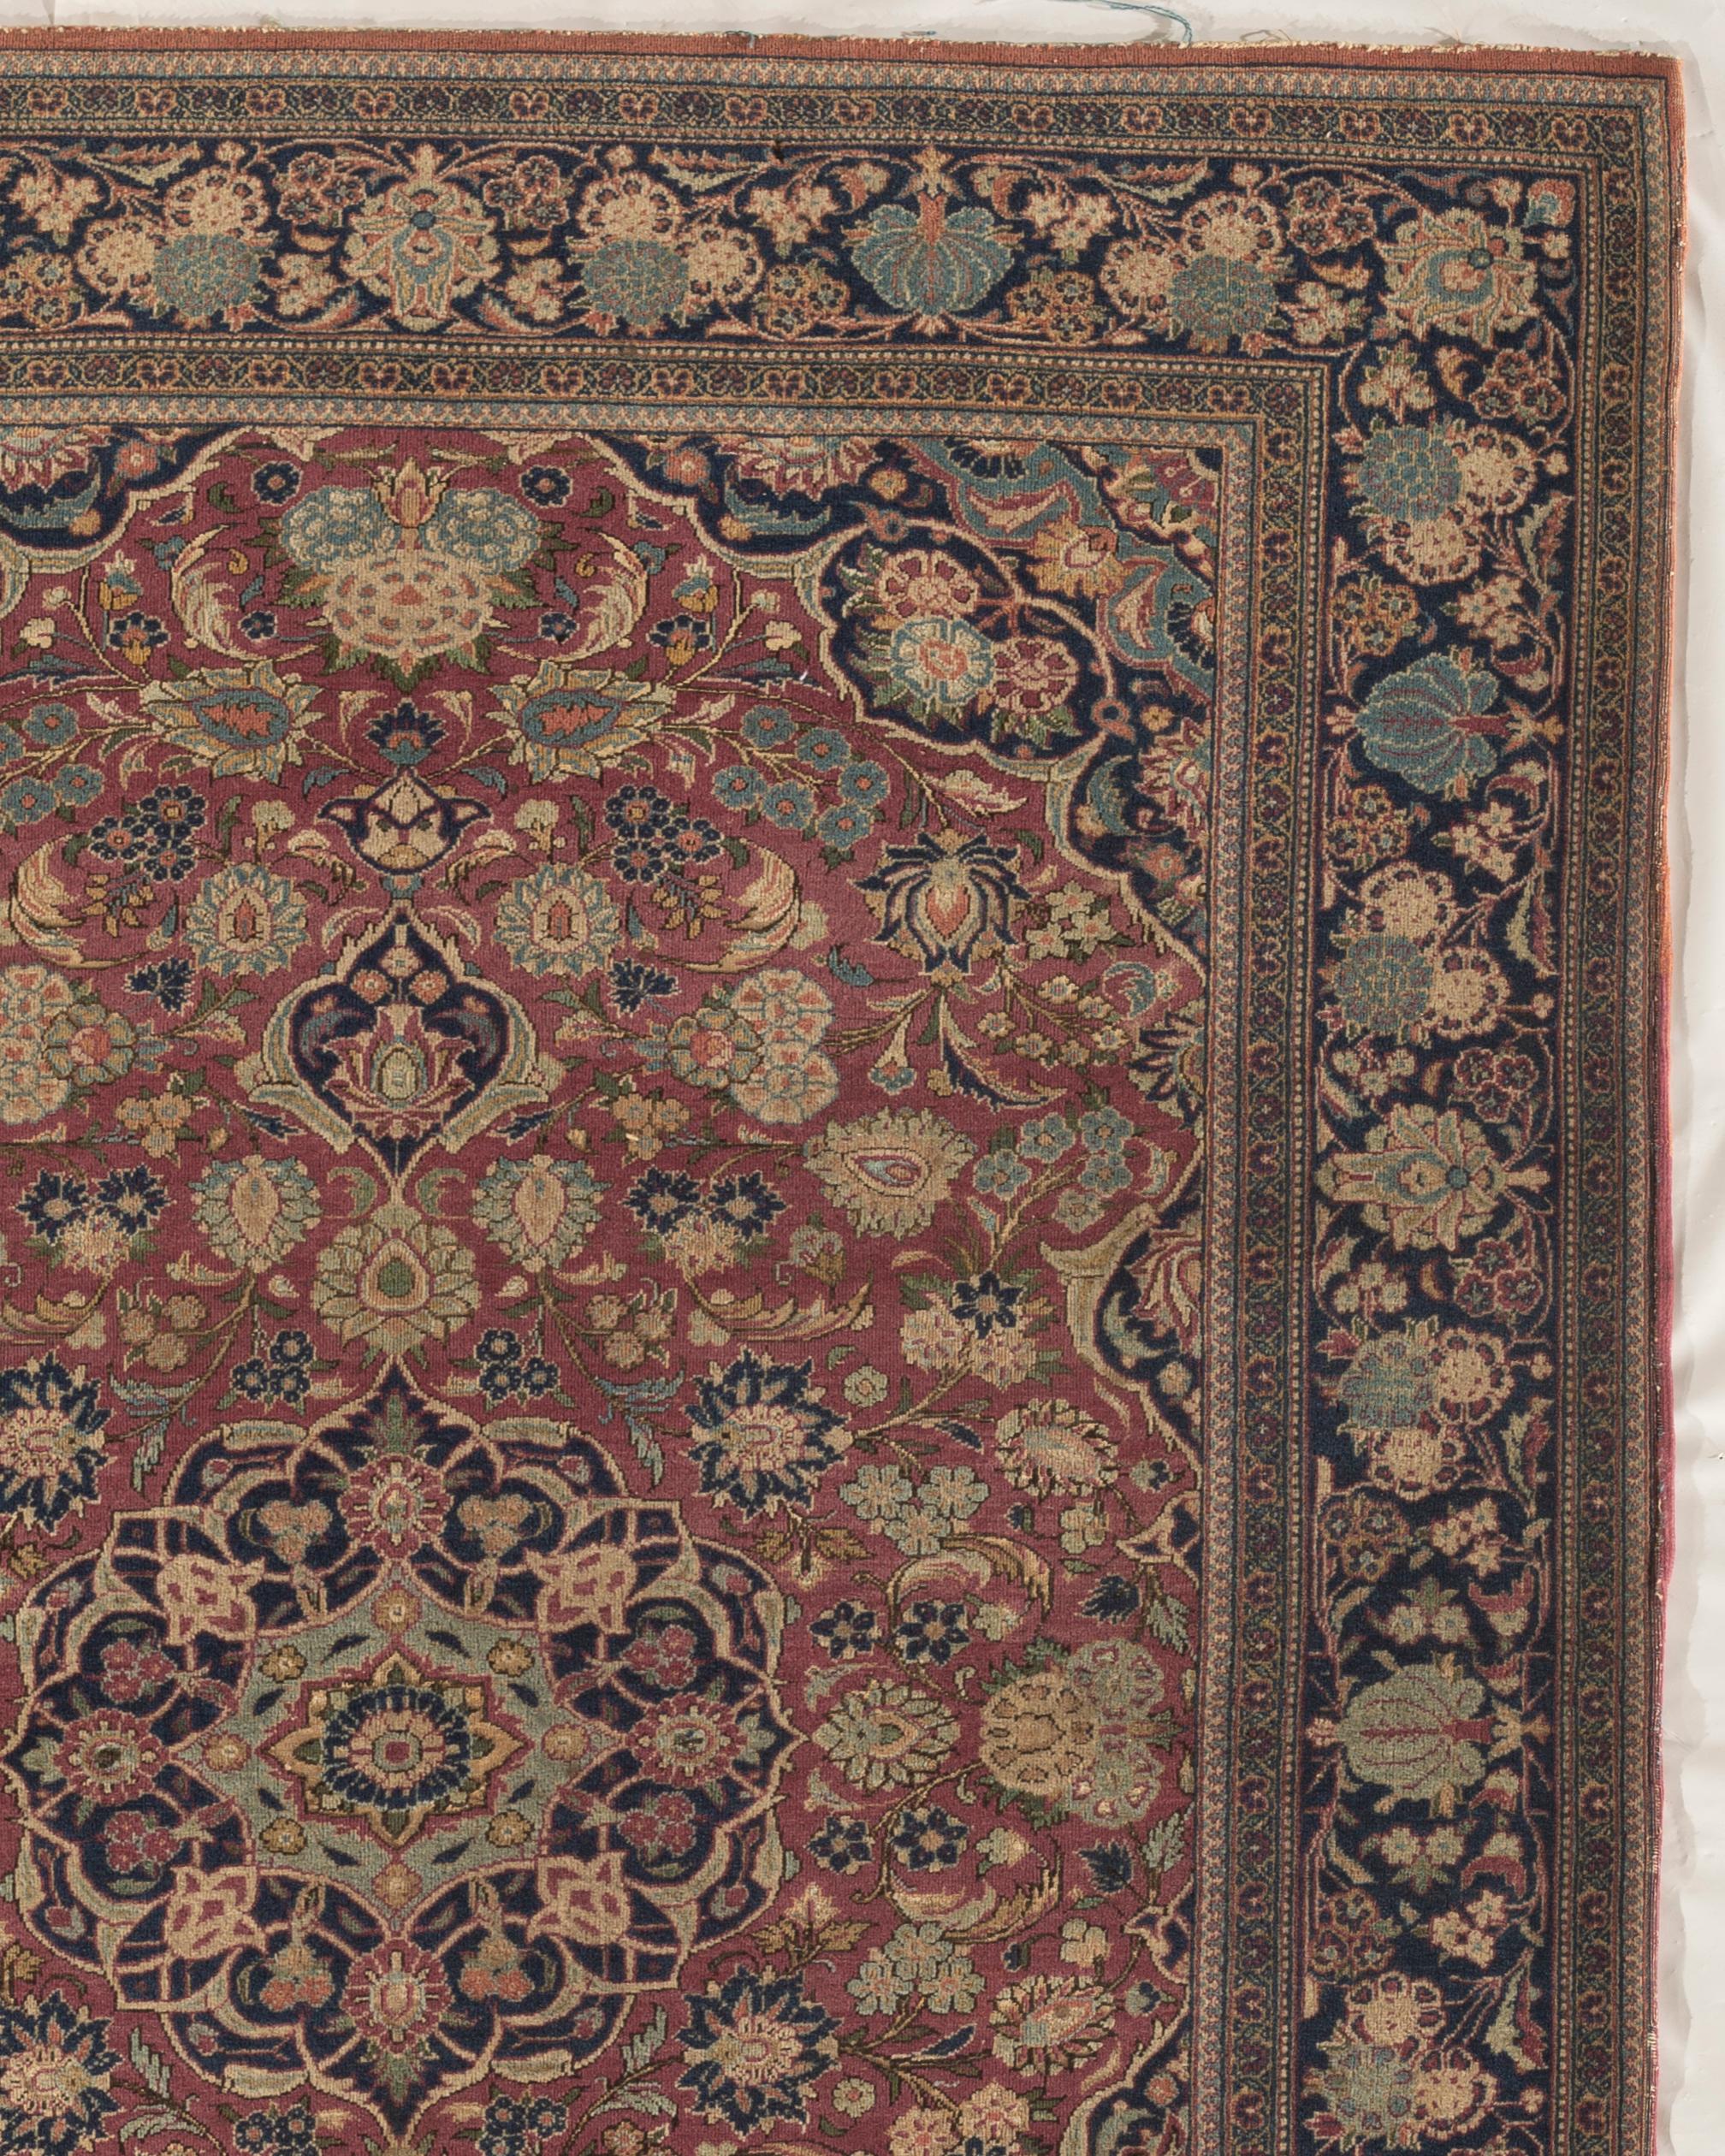 Hand-Woven Antique Persian Isphahan Rug, circa 1900 4' x 6'6 For Sale